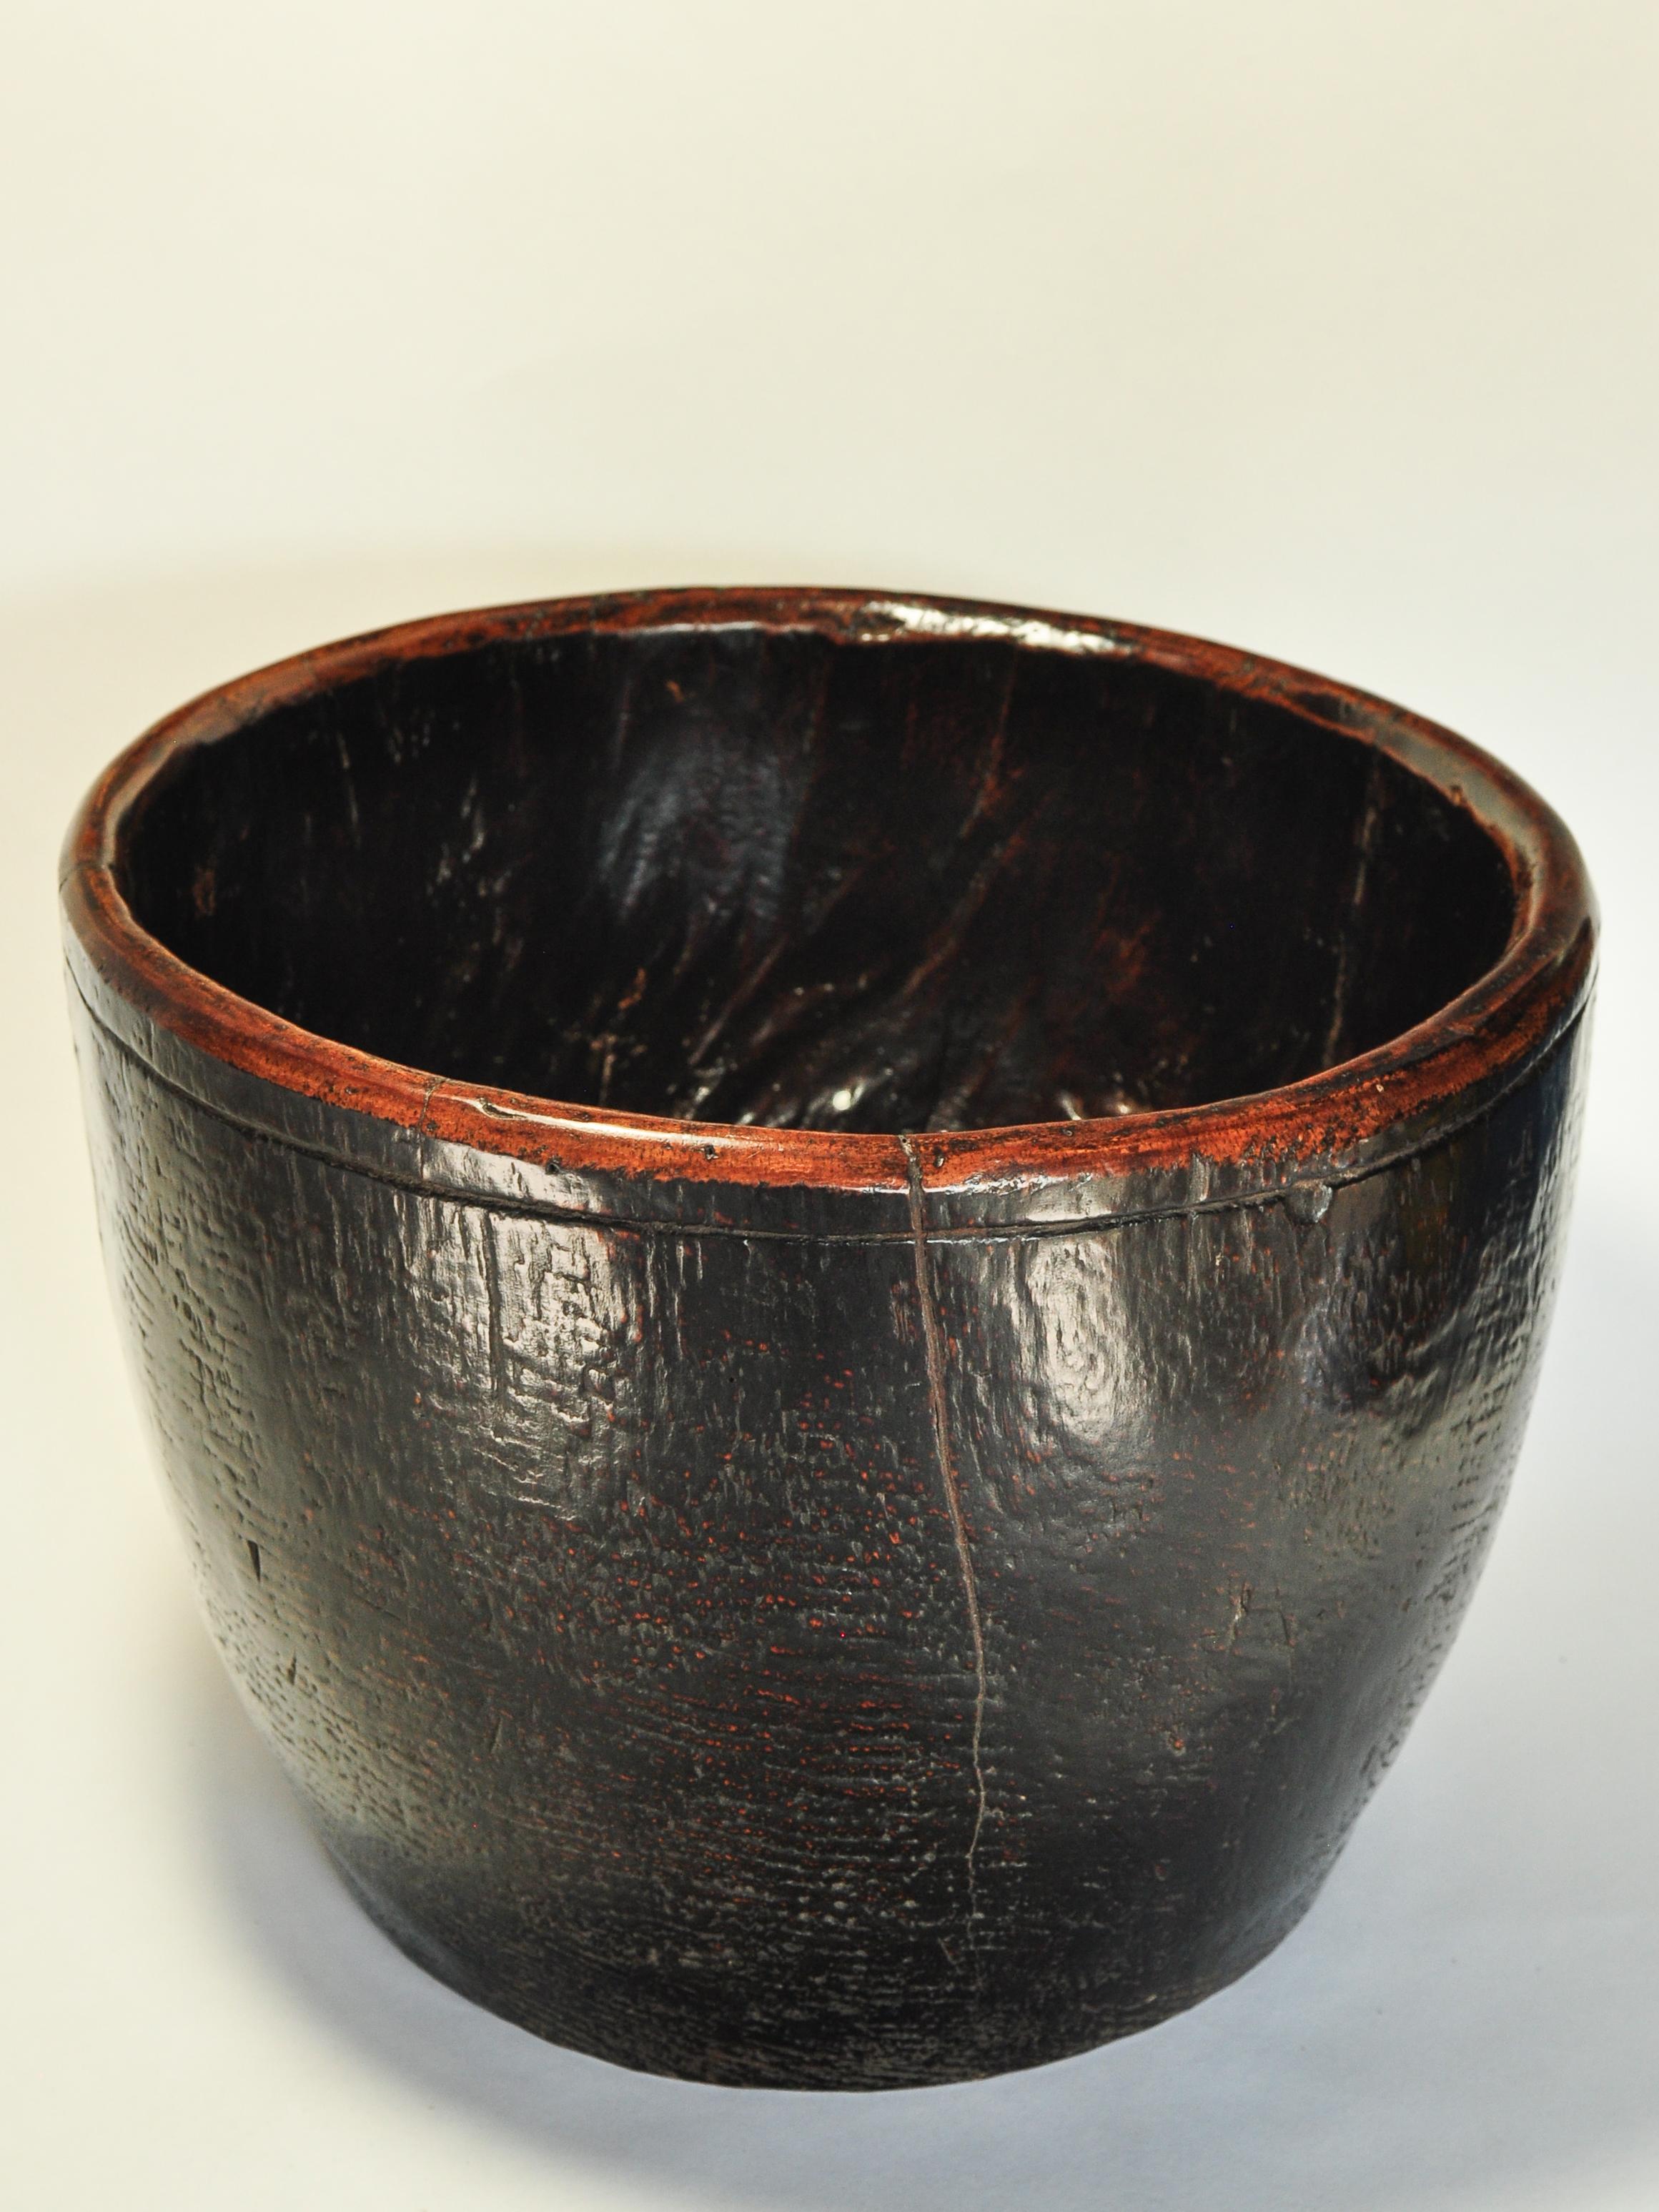 Vintage Wooden Measure from Lampung, Sumatra, Mid-20th Century. 
This handcrafted wooden measuring pot comes from Lampung province in southern Sumatra. It is crafted by hand from a single piece of merbau wood, highly prized for its density and